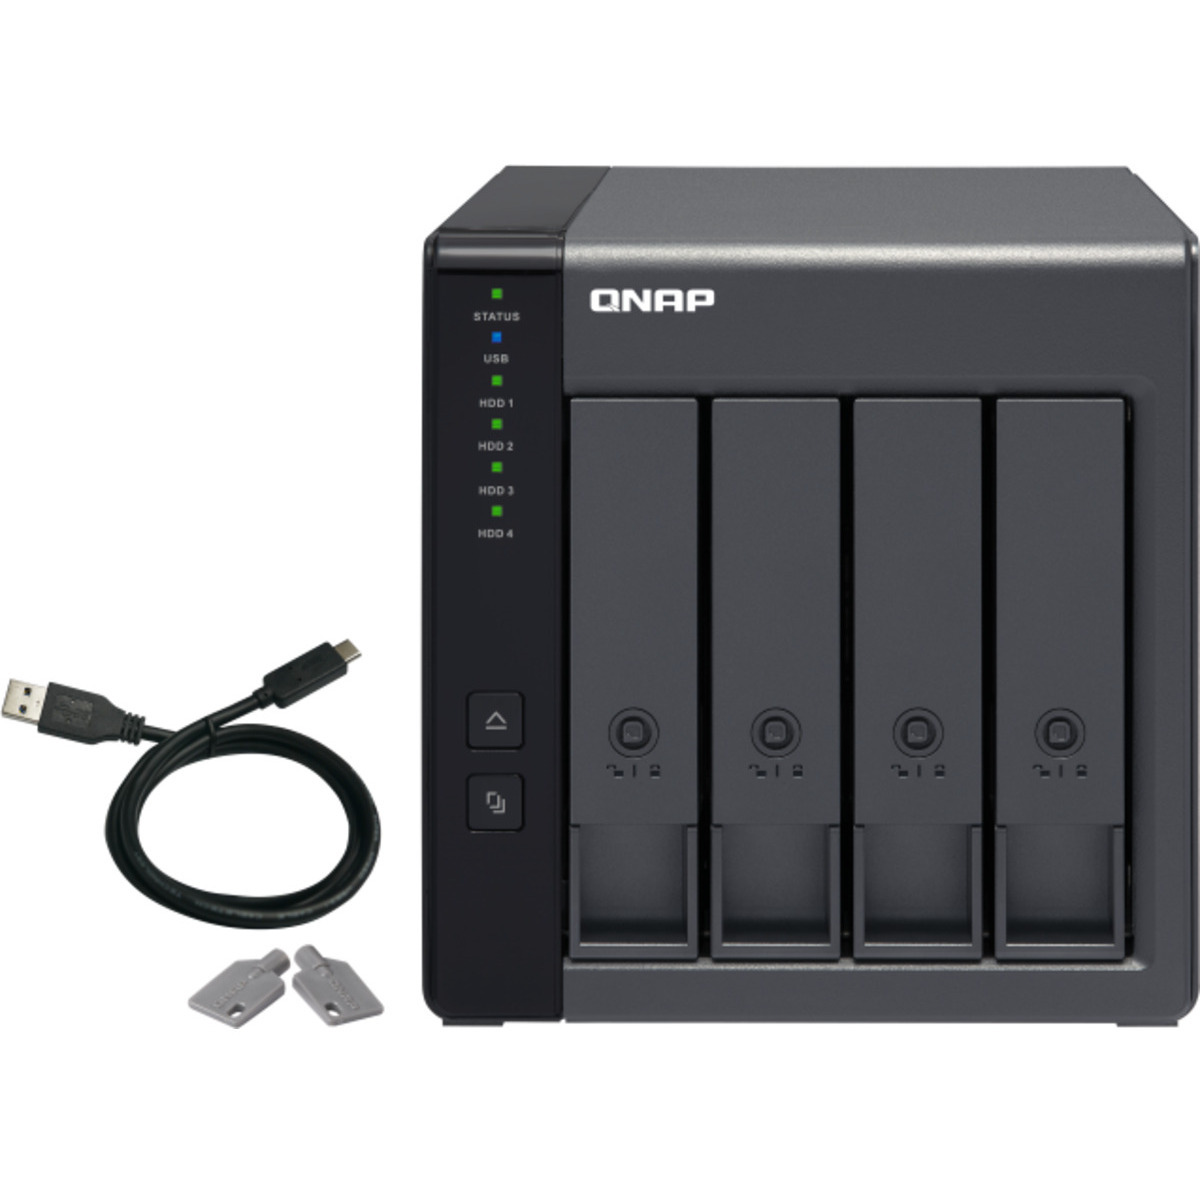 buy $881 QNAP TR-004 External Expansion Drive 24tb Desktop Expansion Enclosure 4x6000gb Western Digital Blue WD60EZAZ 3.5 5400rpm SATA 6Gb/s HDD CONSUMER Class Drives Installed - Burn-In Tested - nas headquarters buy network attached storage server device das new raid-5 free shipping usa christmas new year holiday sale TR-004 External Expansion Drive